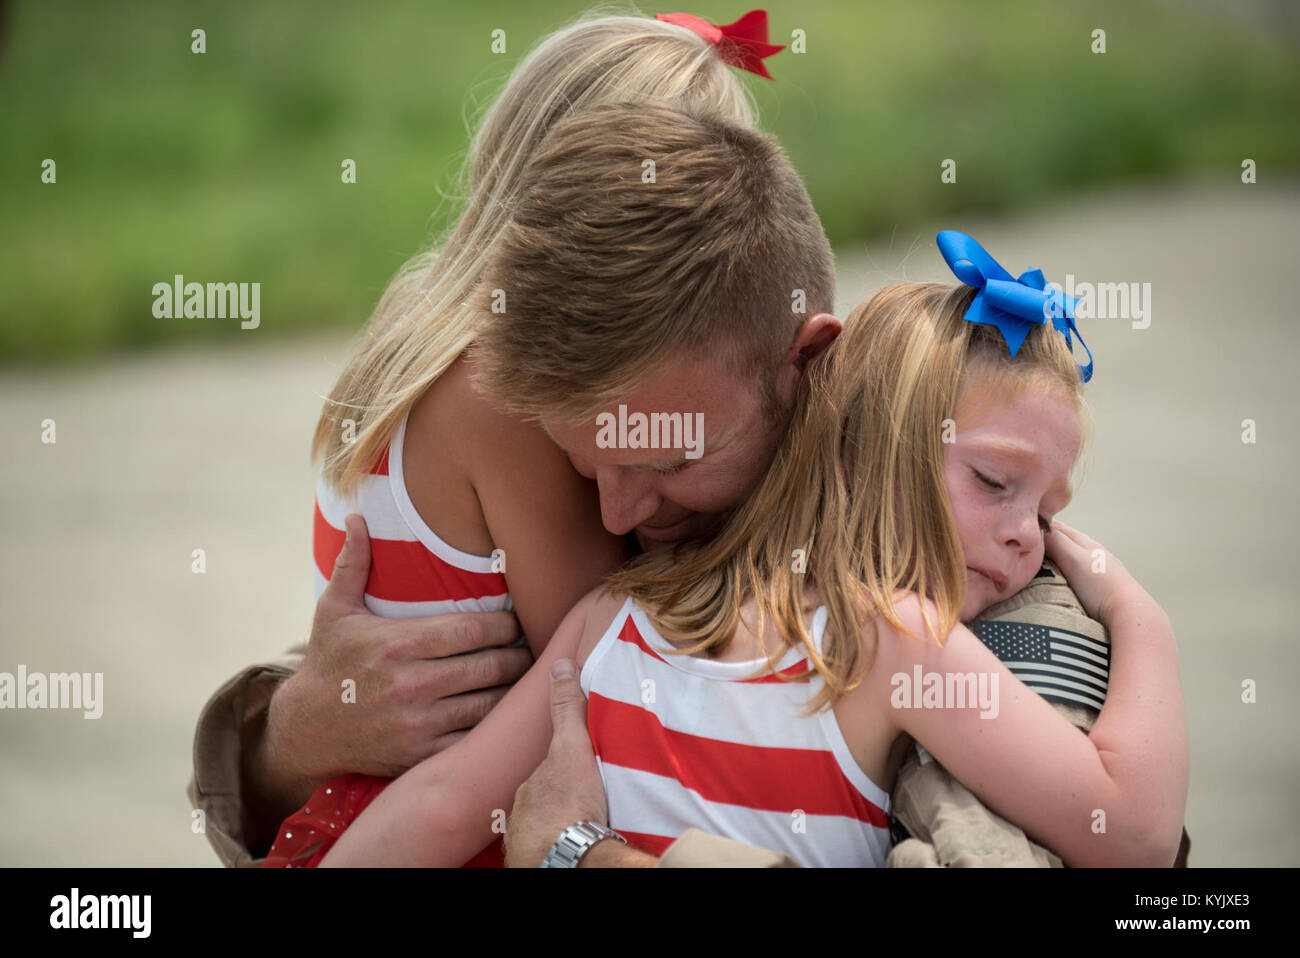 Capt. Ross Farling, a C-130 pilot in the 123rd Airlift Wing, hugs his daughters during an emotional homecoming ceremony at the Kentucky Air National Guard Base in Louisville, Ky., July 4, 2015. Farling was among 39 Kentucky Air Guardsmen who were returning from a deployment to the Persian Gulf region, where they've been supporting Operation Freedom's Sentinel since February. (U.S. Air National Guard photo by Maj. Dale Greer) Stock Photo